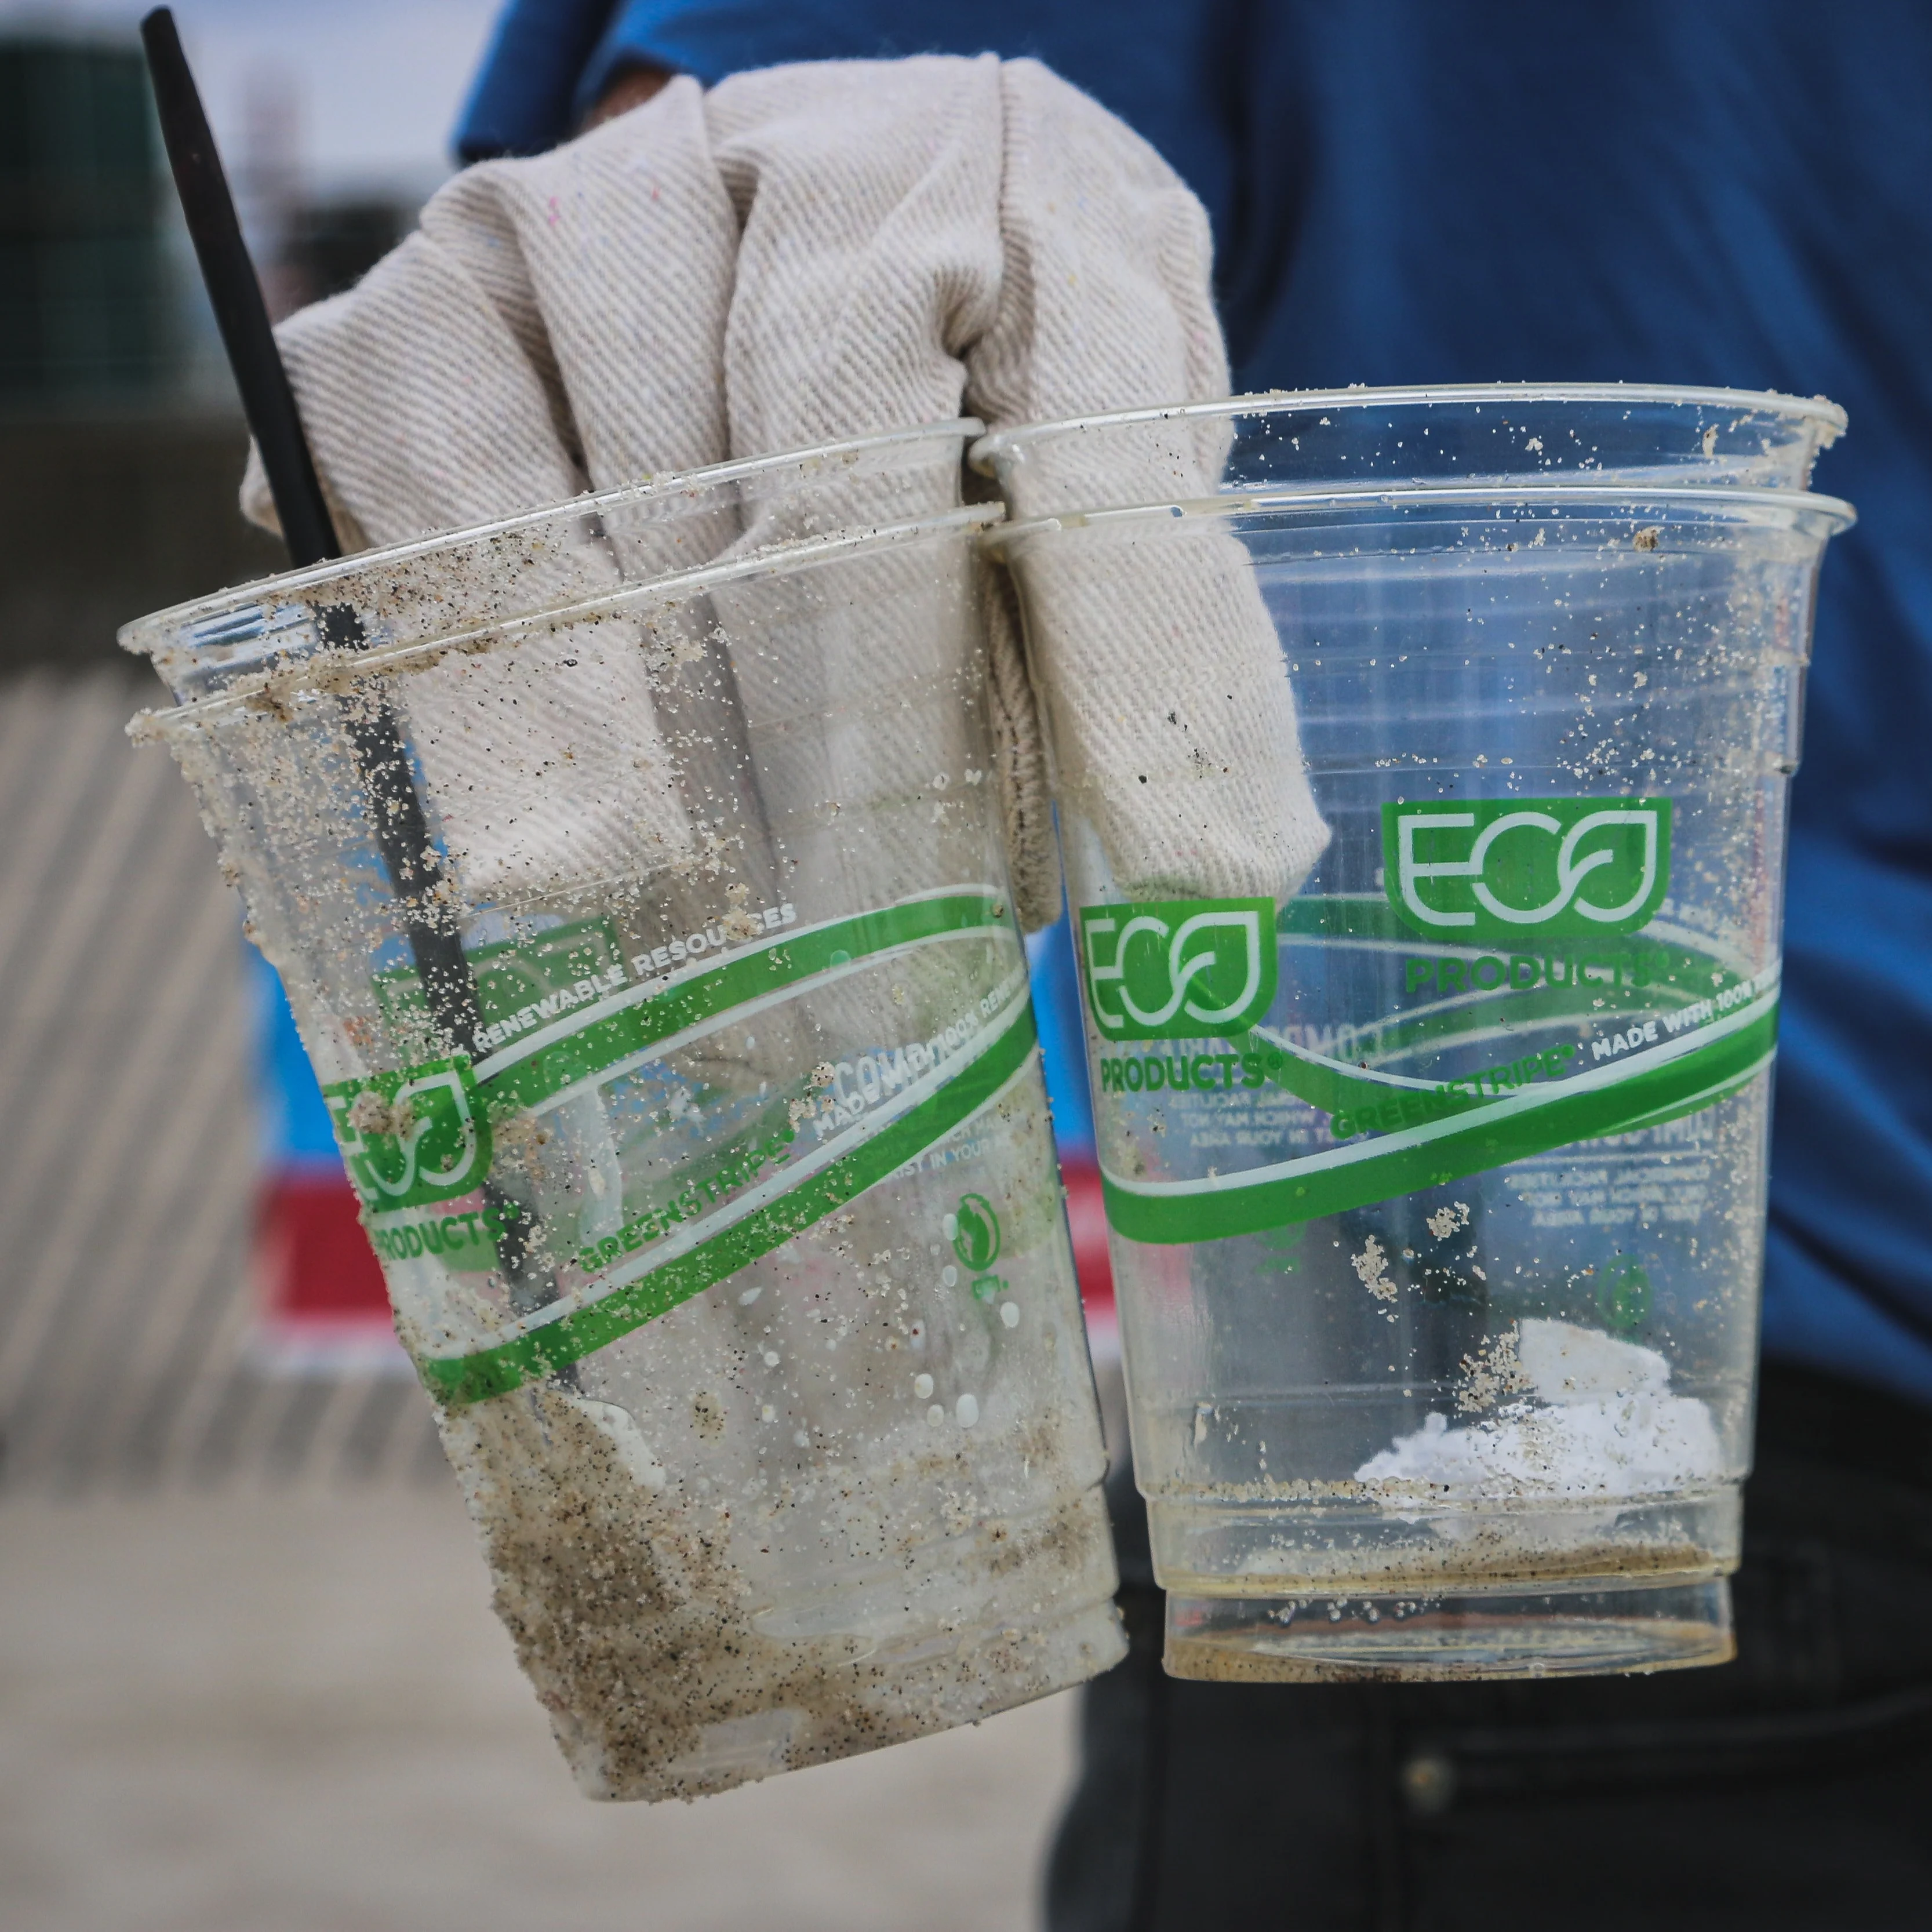 Gloved hand holds plastic beer glasses labelled "ECO"